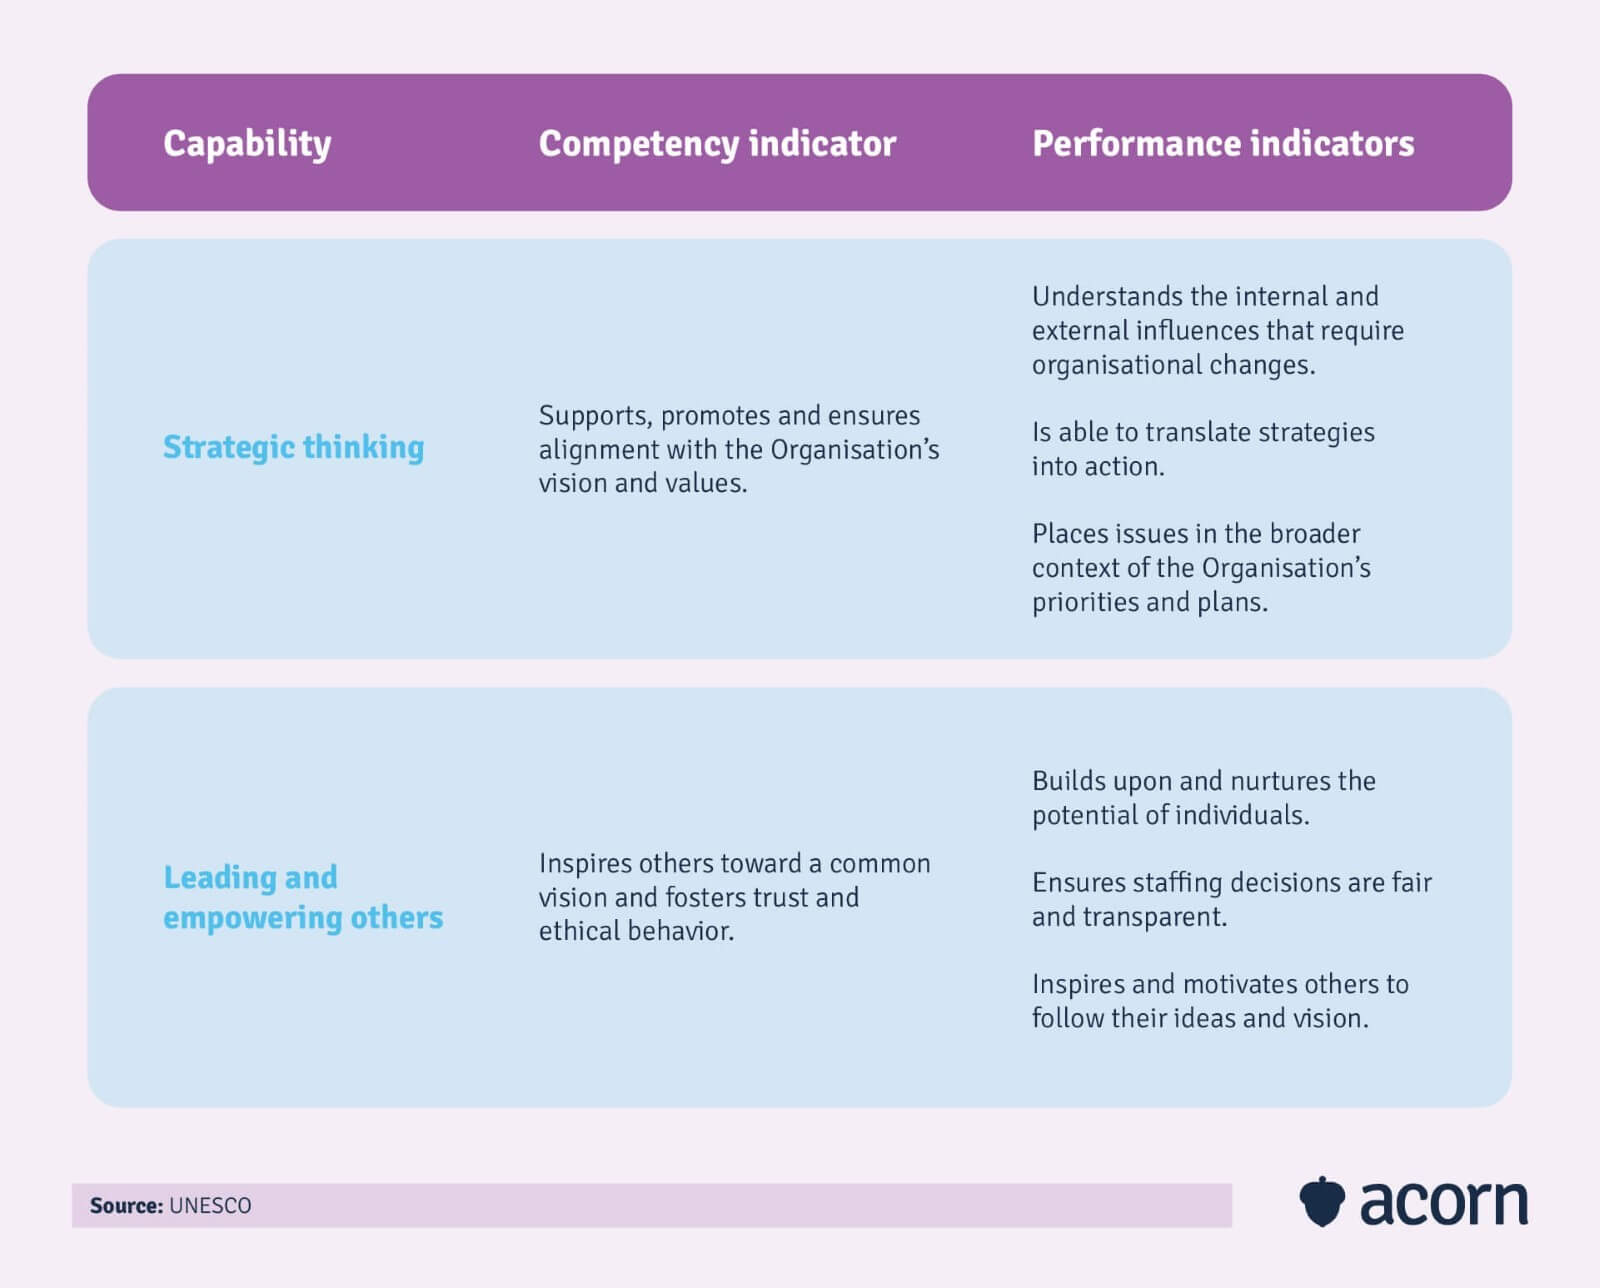 Infographic demonstrating how a capability is broken down into competencies and performance indicators